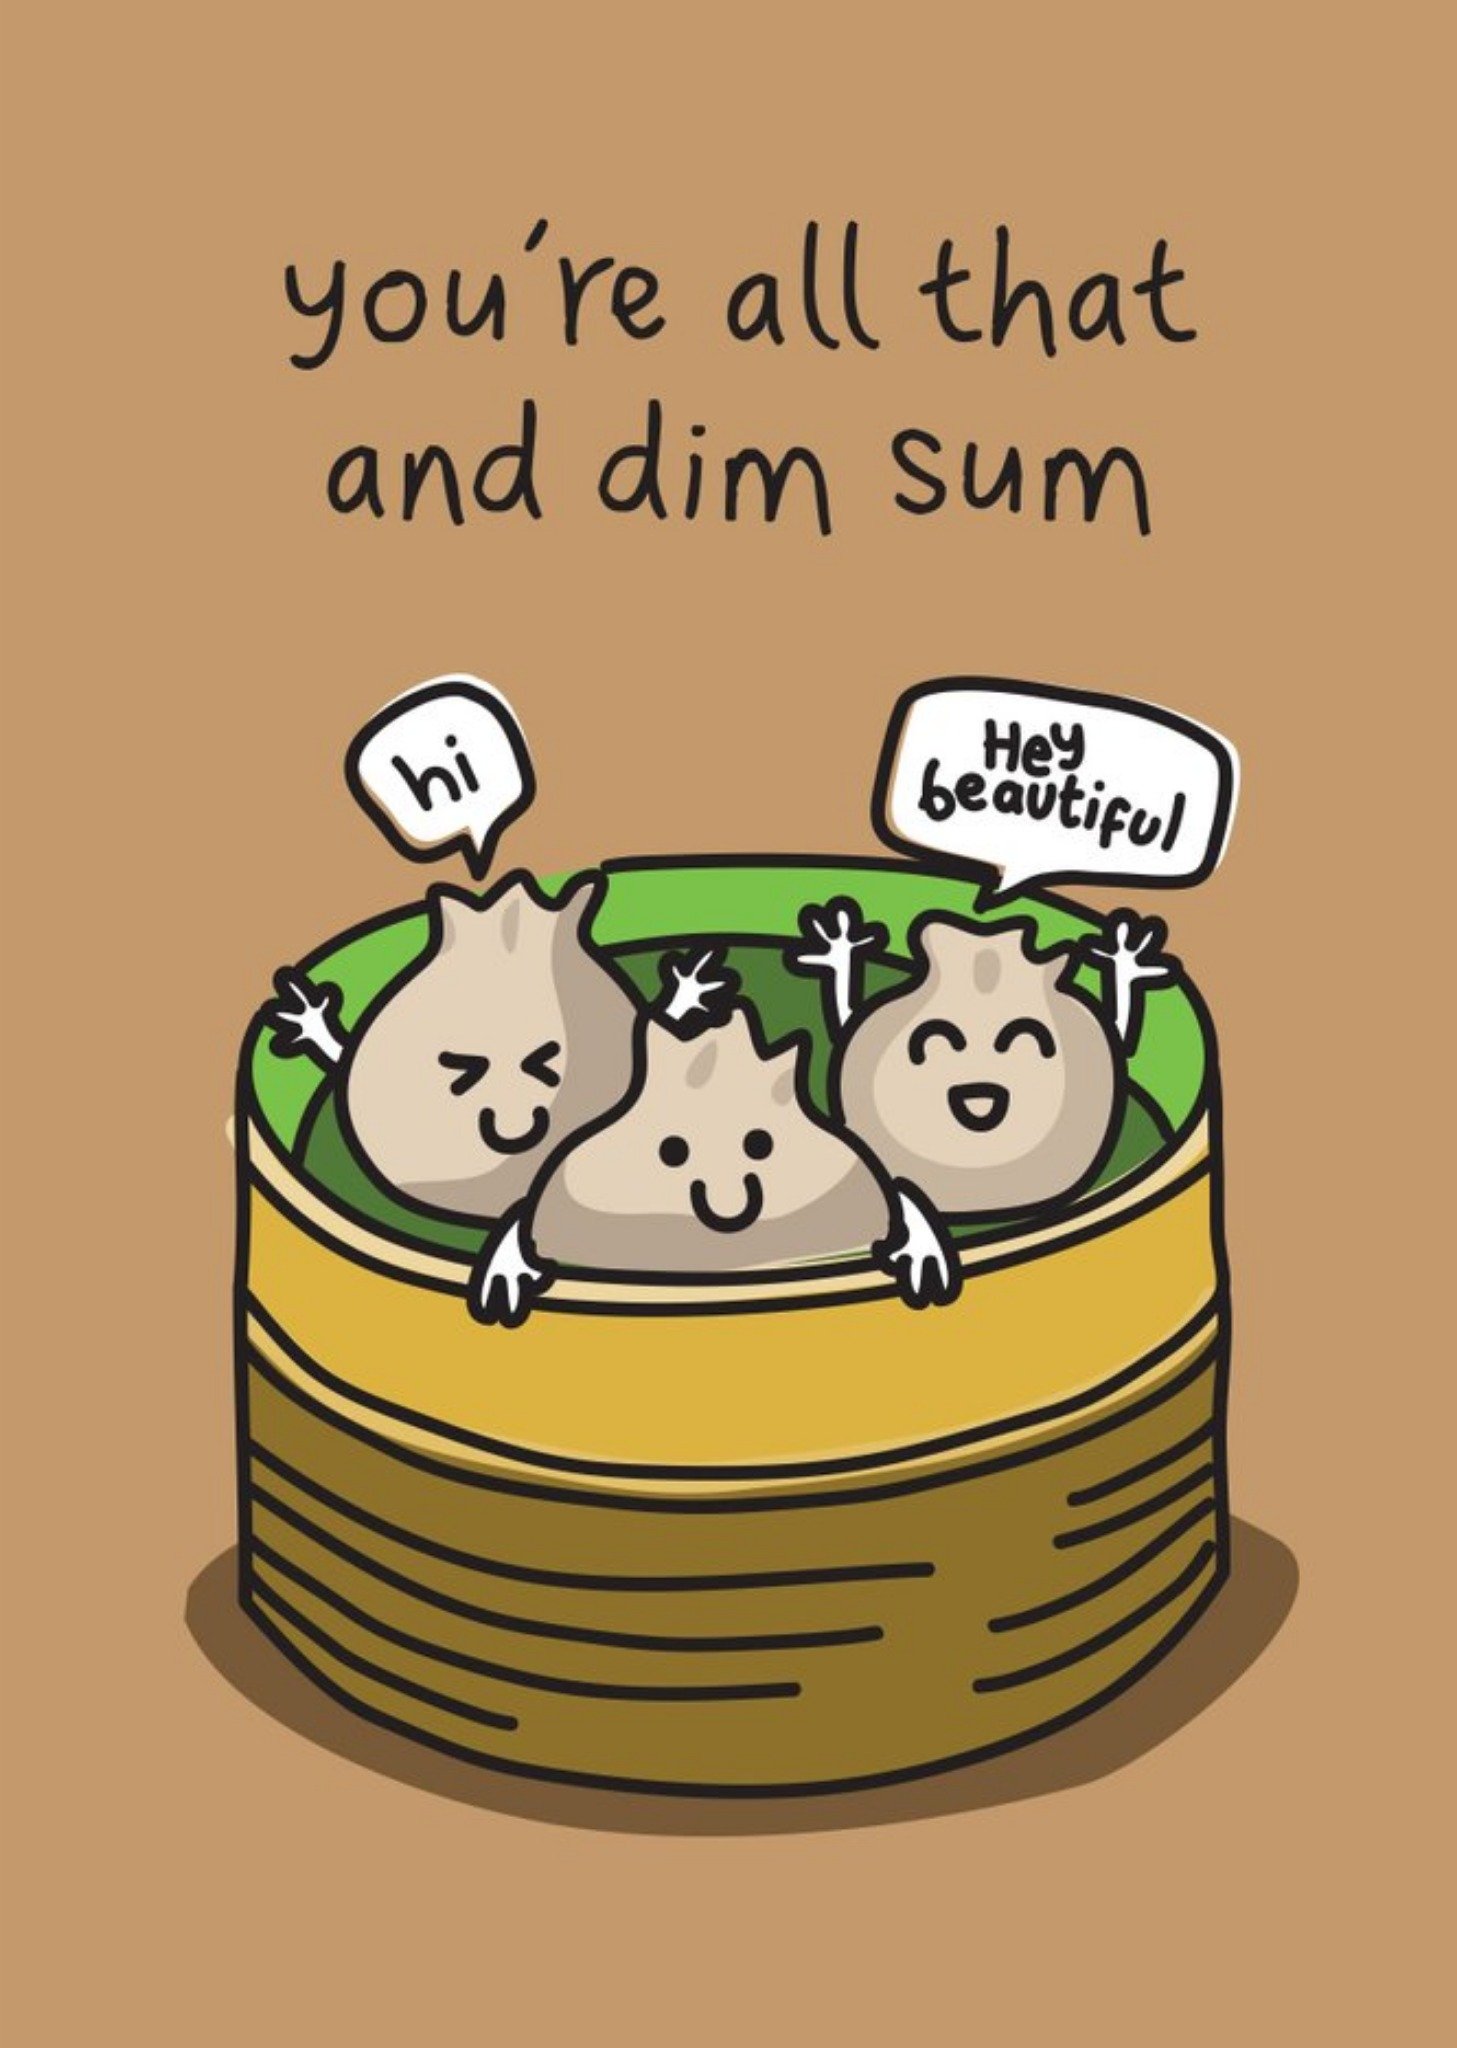 Moonpig You're All That And Dim Sum Funny Pun Card Ecard